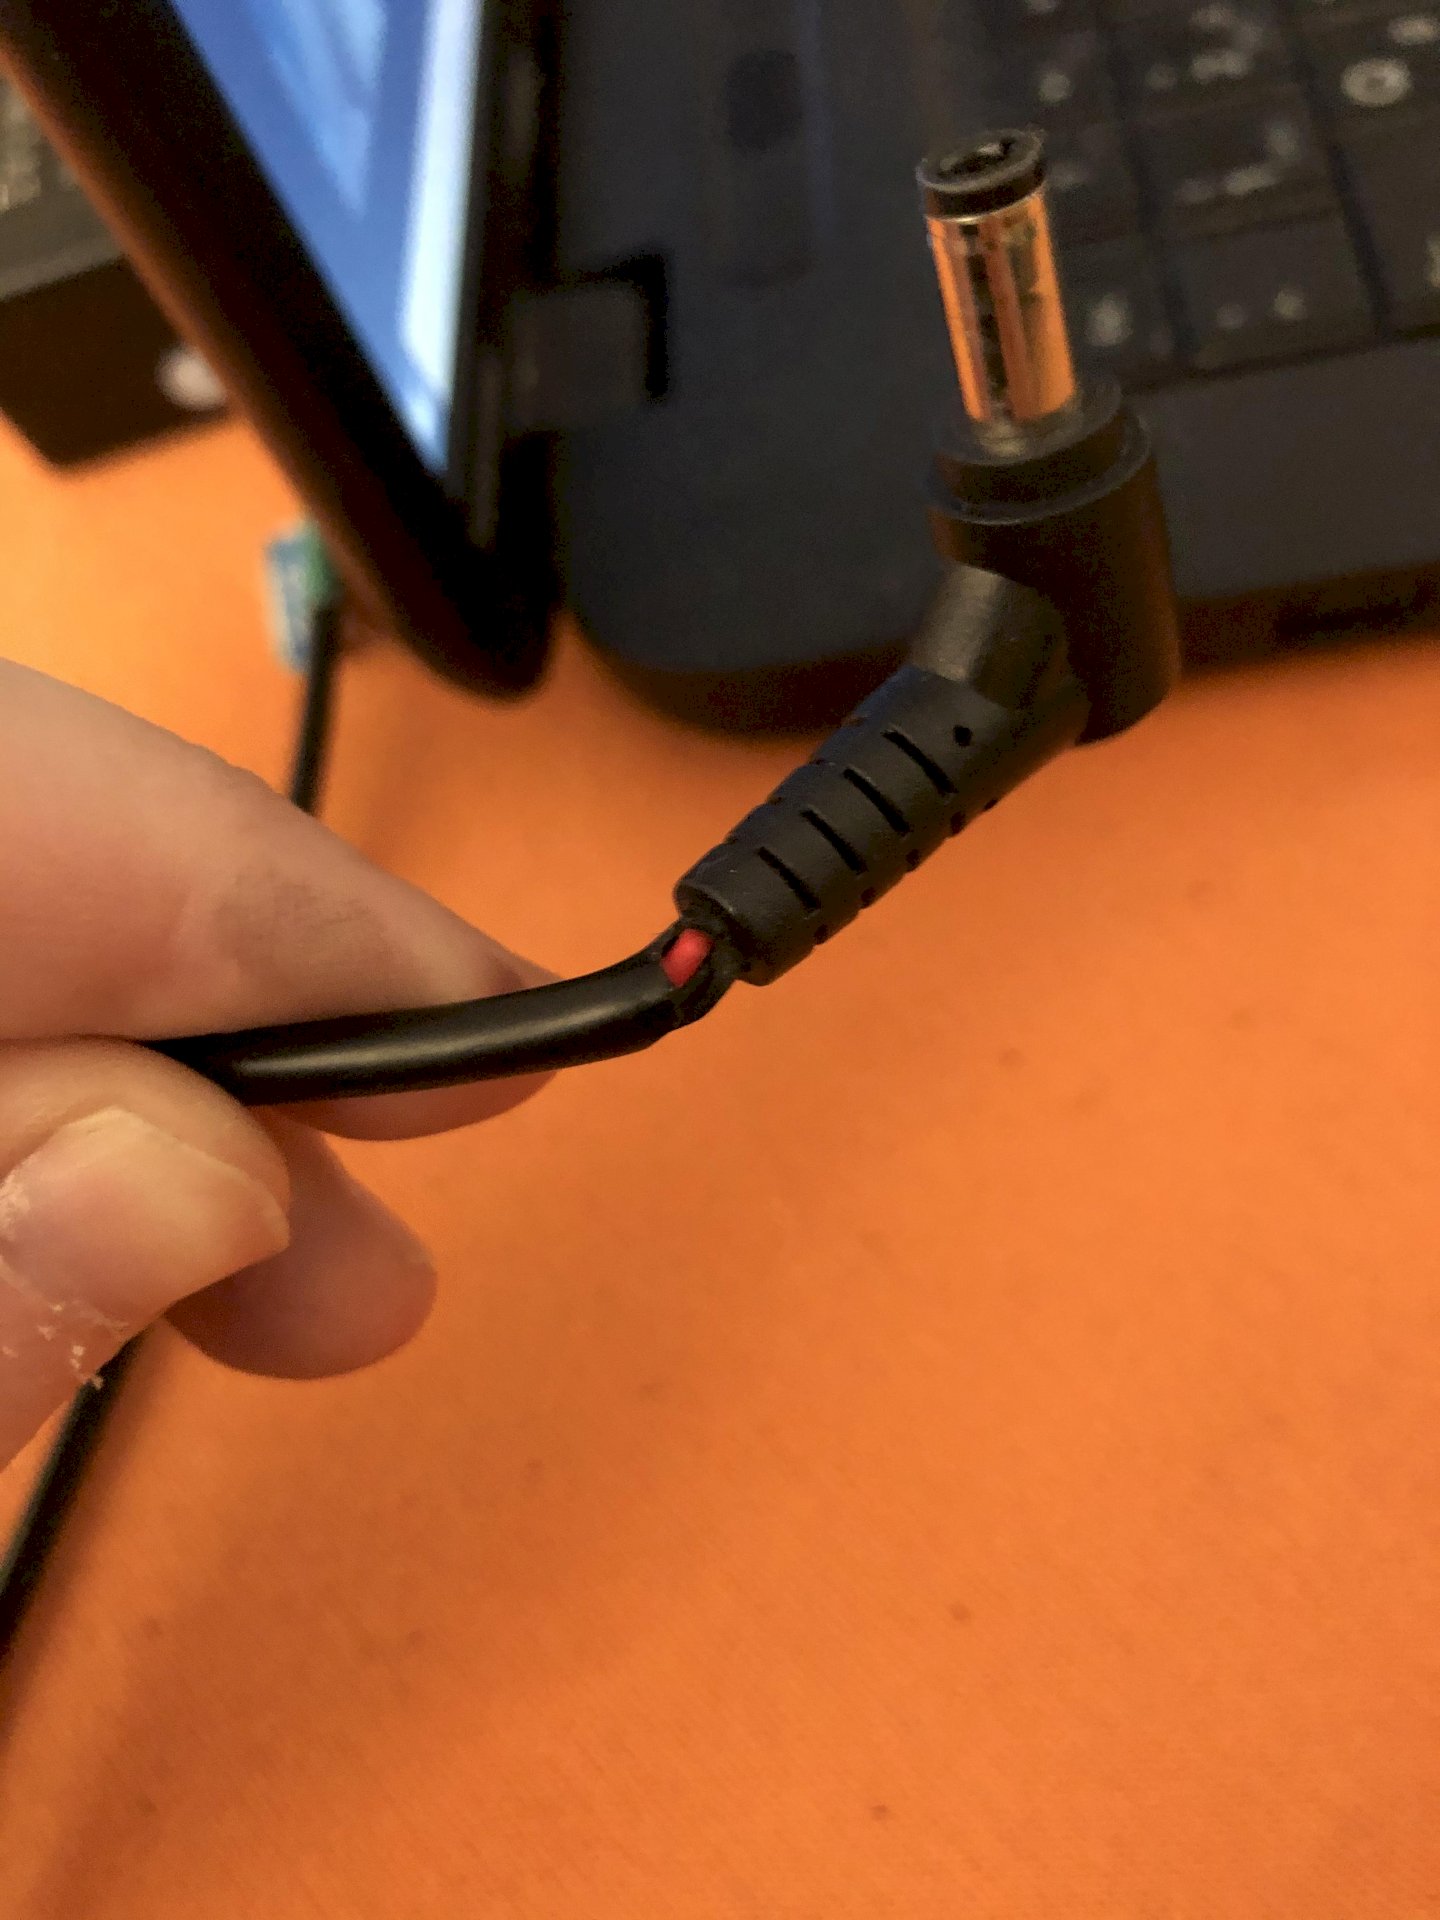 How to repair this broken cable